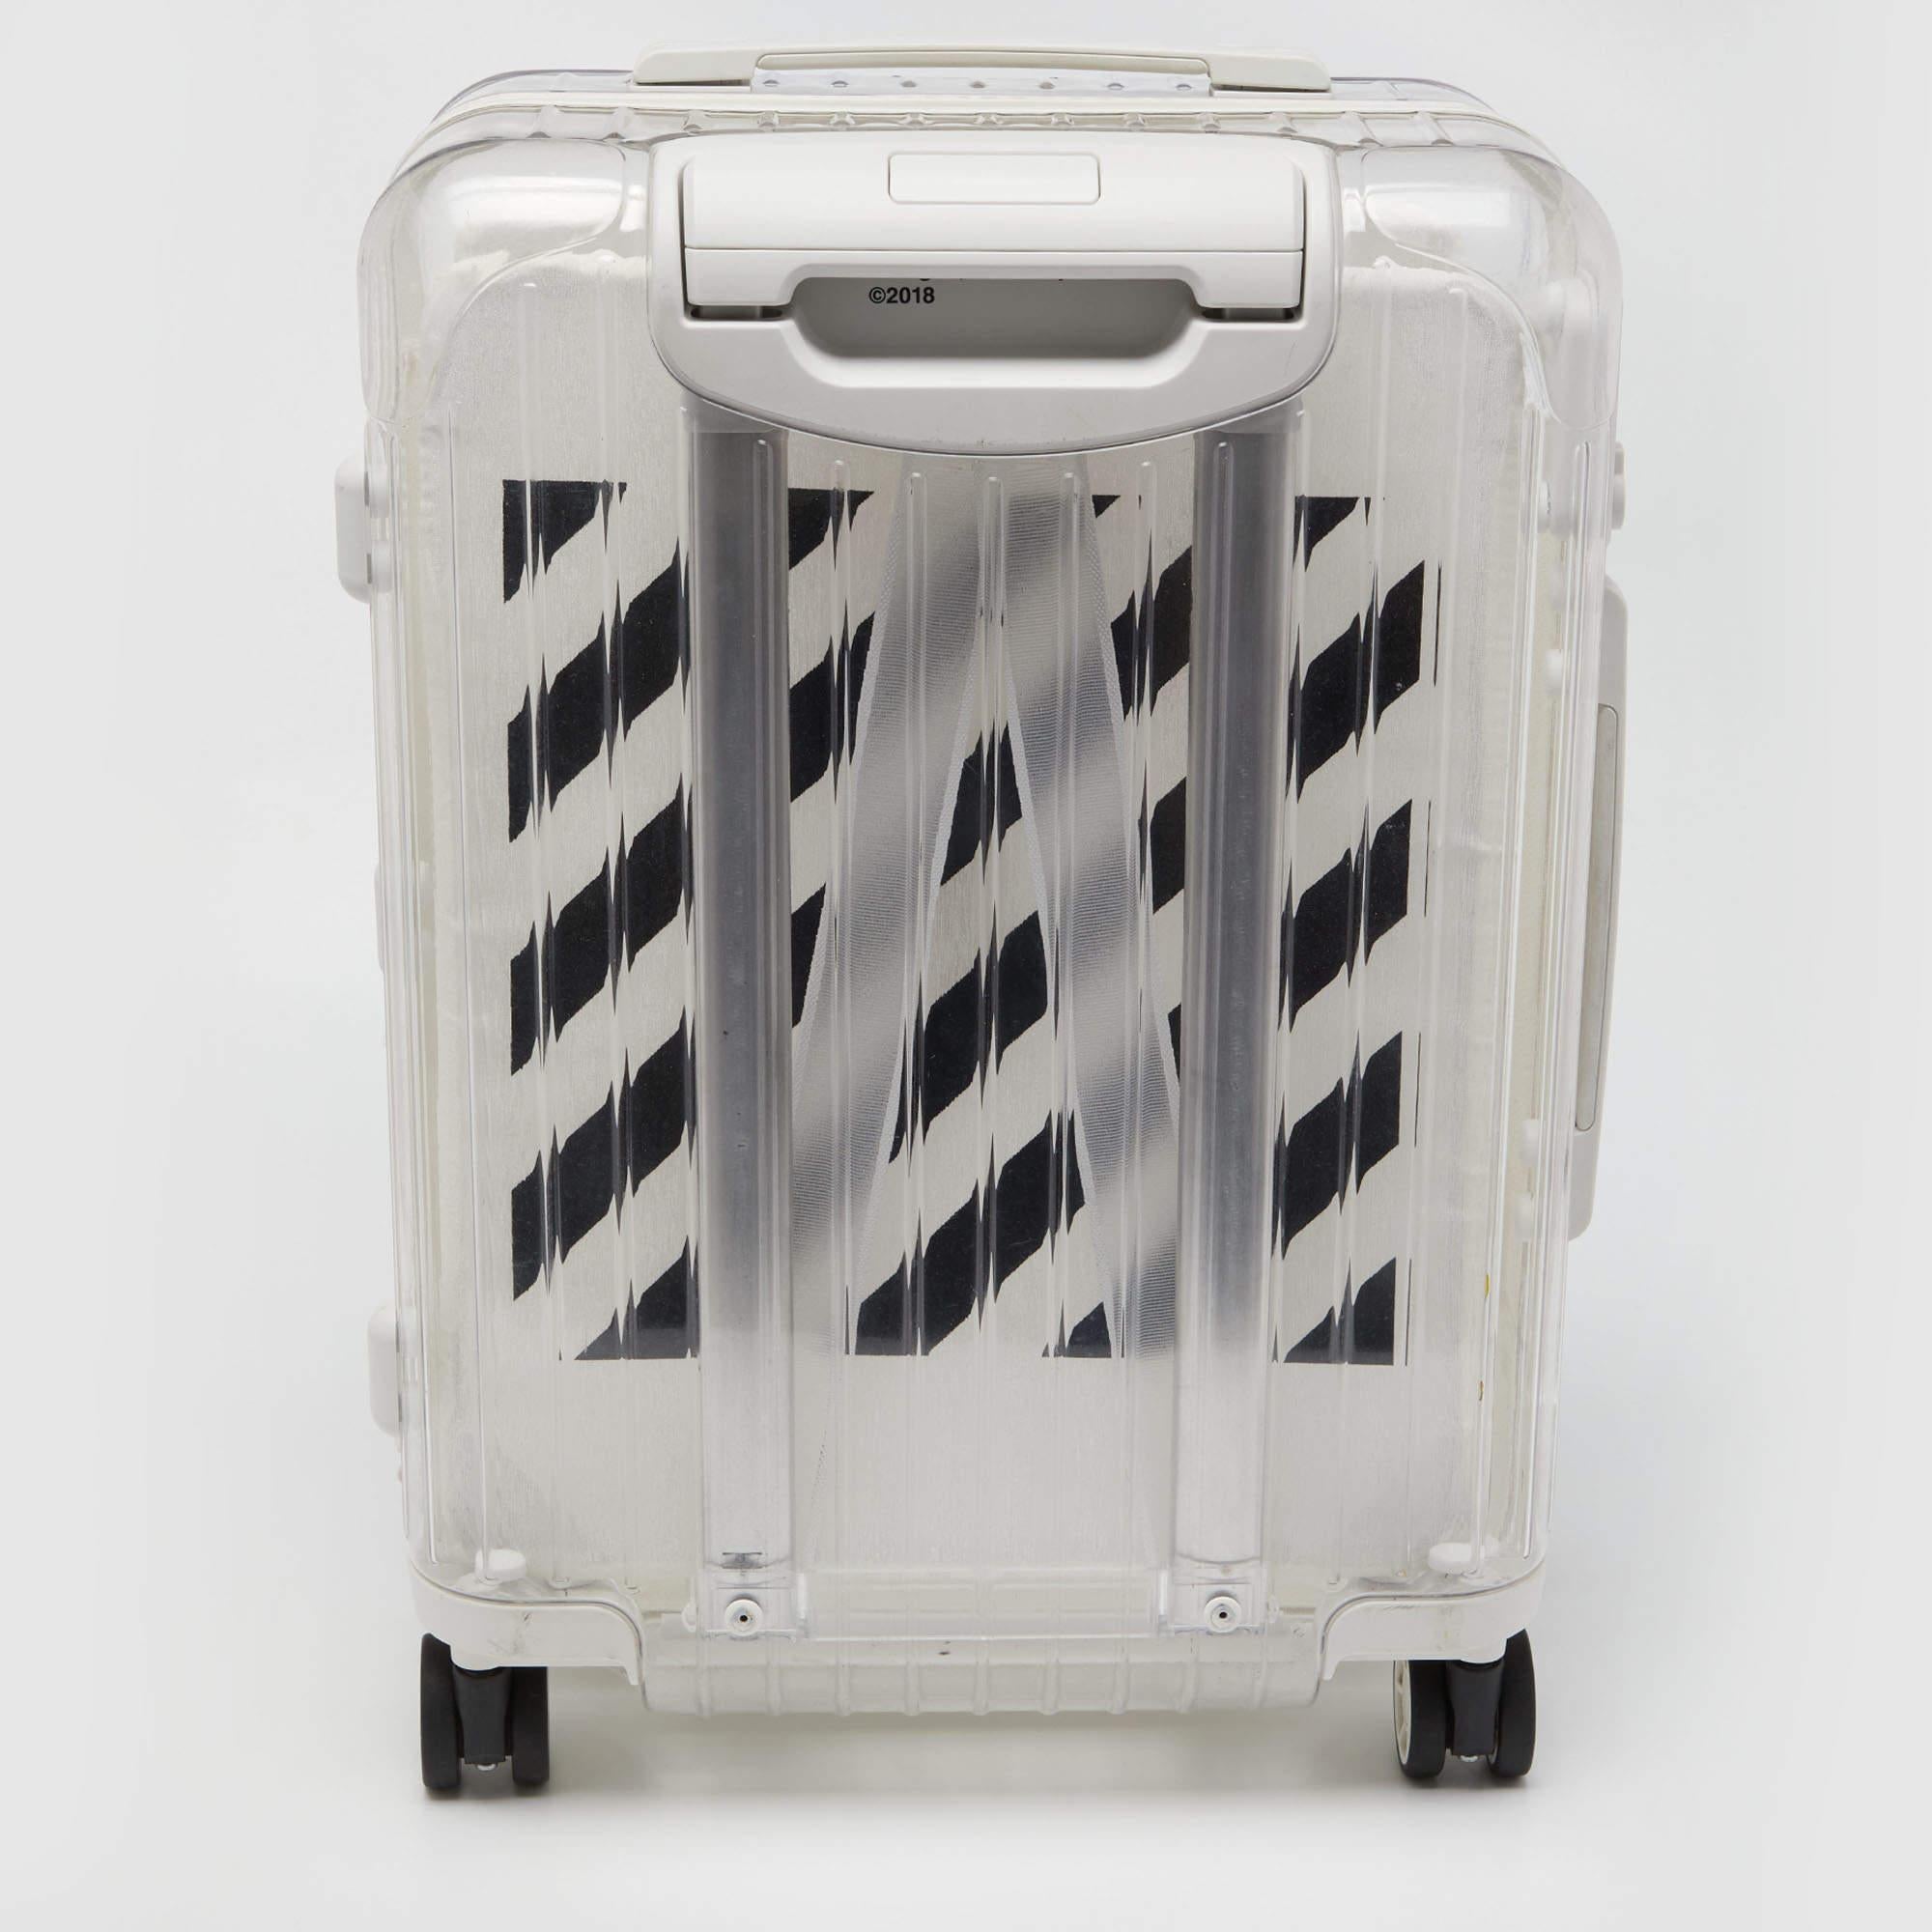 Your best travel partner that will take care of all your belongings, this Off-White x Rimowa suitcase is a must-have. Trust this creation for your travel needs, durability, and style.

Includes: Original Dustbag, Original Pouch, Luggage Belt Strap,